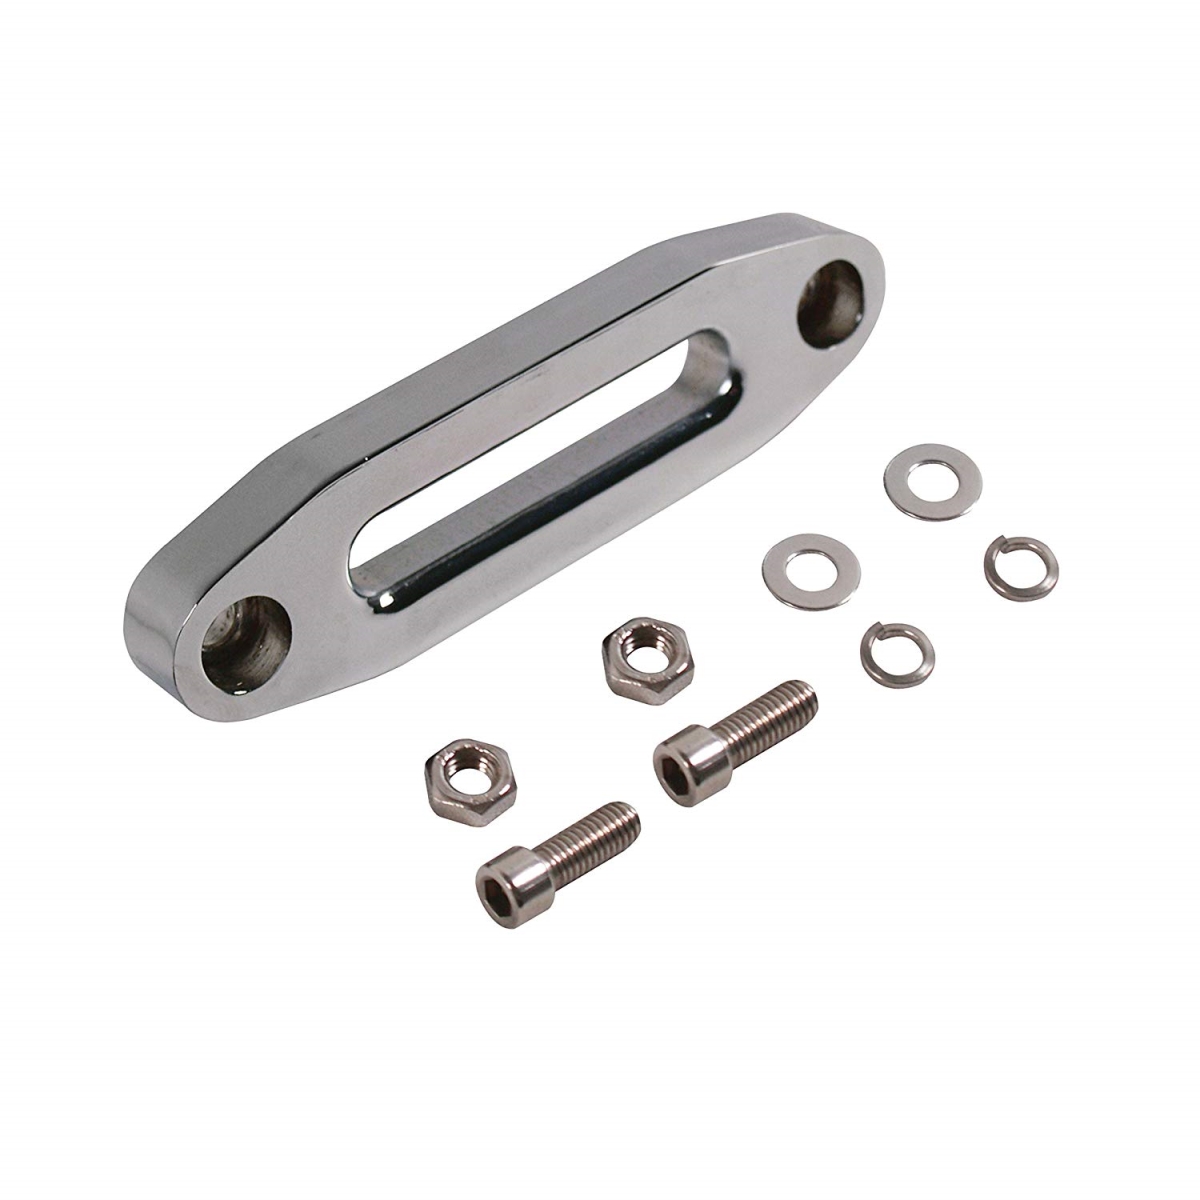 Picture of Extreme Max 5600.3096 ATV Hawse Aluminum Fairlead for Synthetic Winch Rope Cable